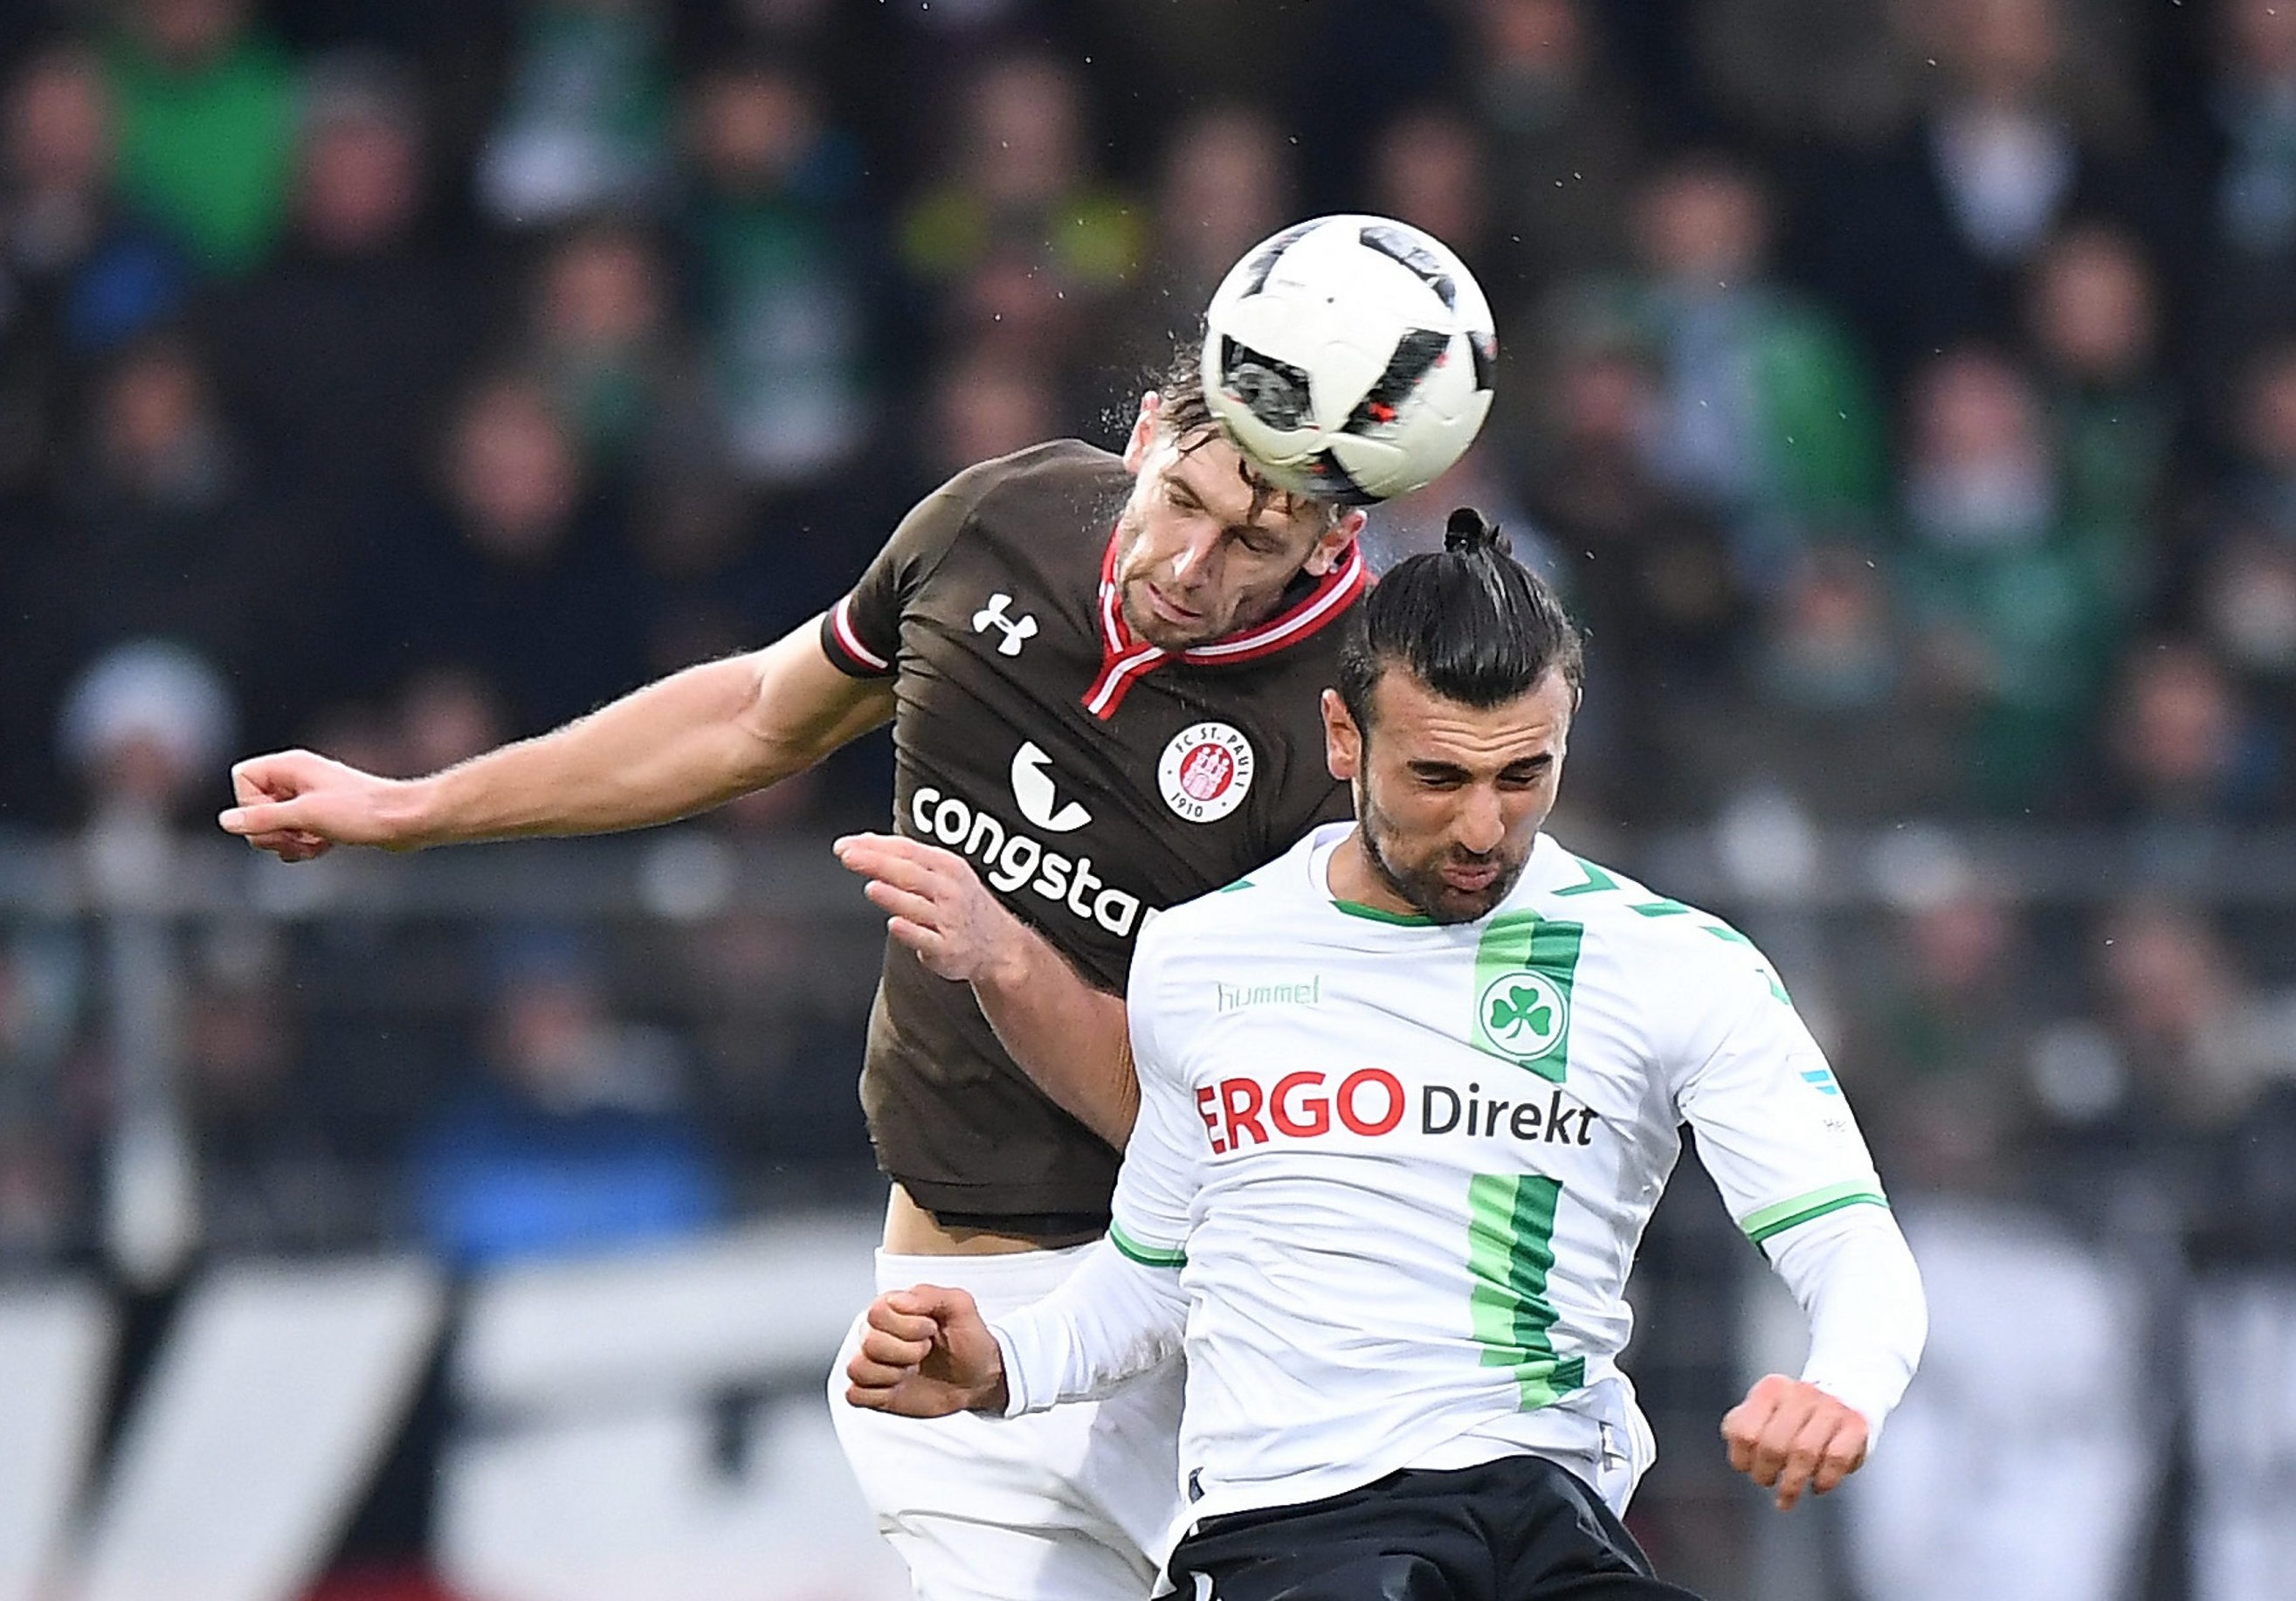 Lasse Sobiech was again very dependable in the challenge – especially in the air, as seen here against Fürth's Serdar Dursun.